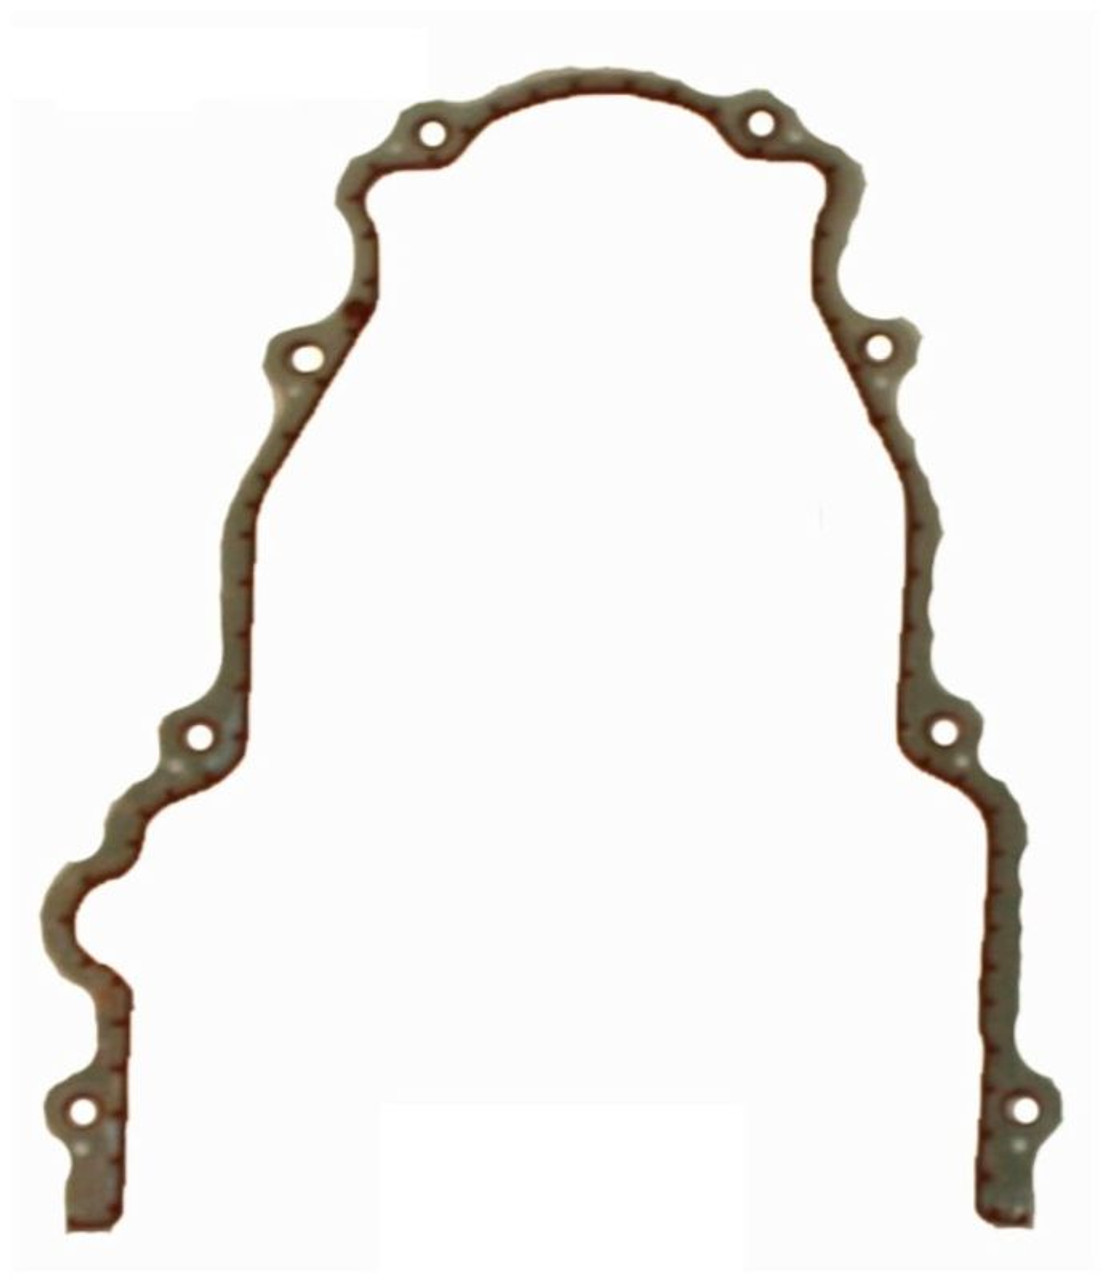 2007 Saab 9-7x 5.3L Engine Timing Cover Gasket TCG293-A -466